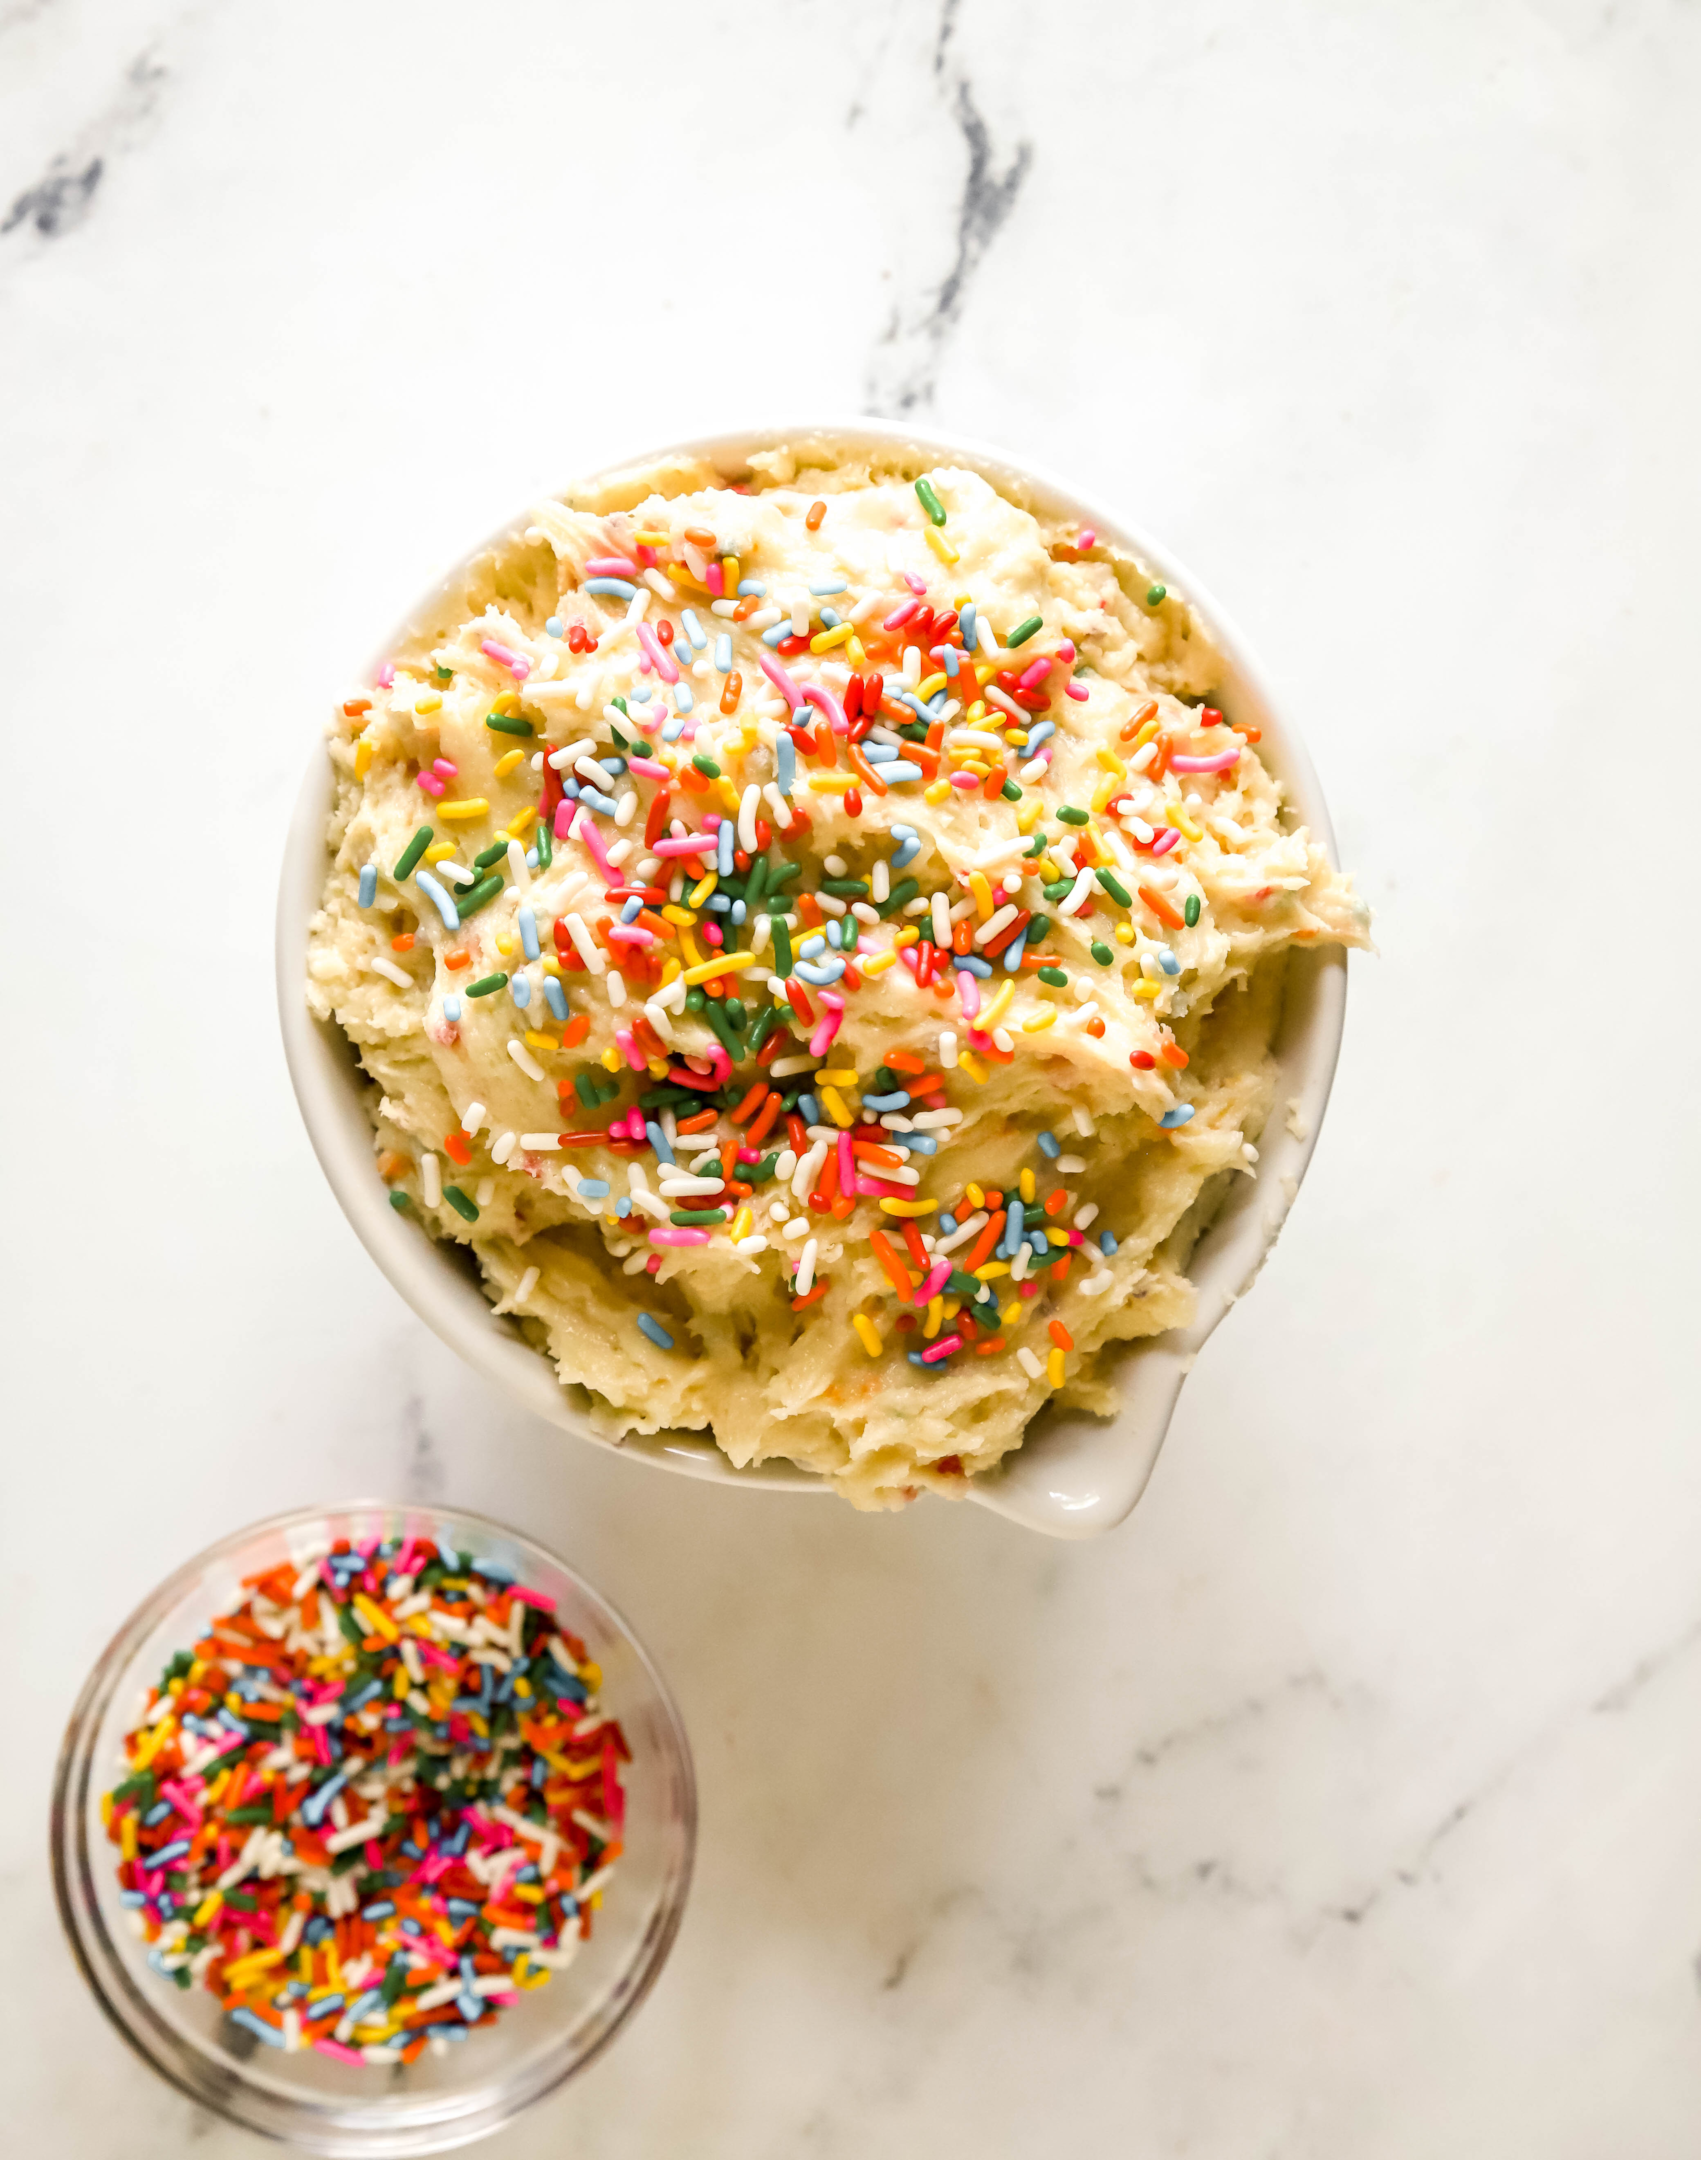 bowl of cake batter dip topped with rainbow sprinkles and a bowl of rainbow sprinkles next to it